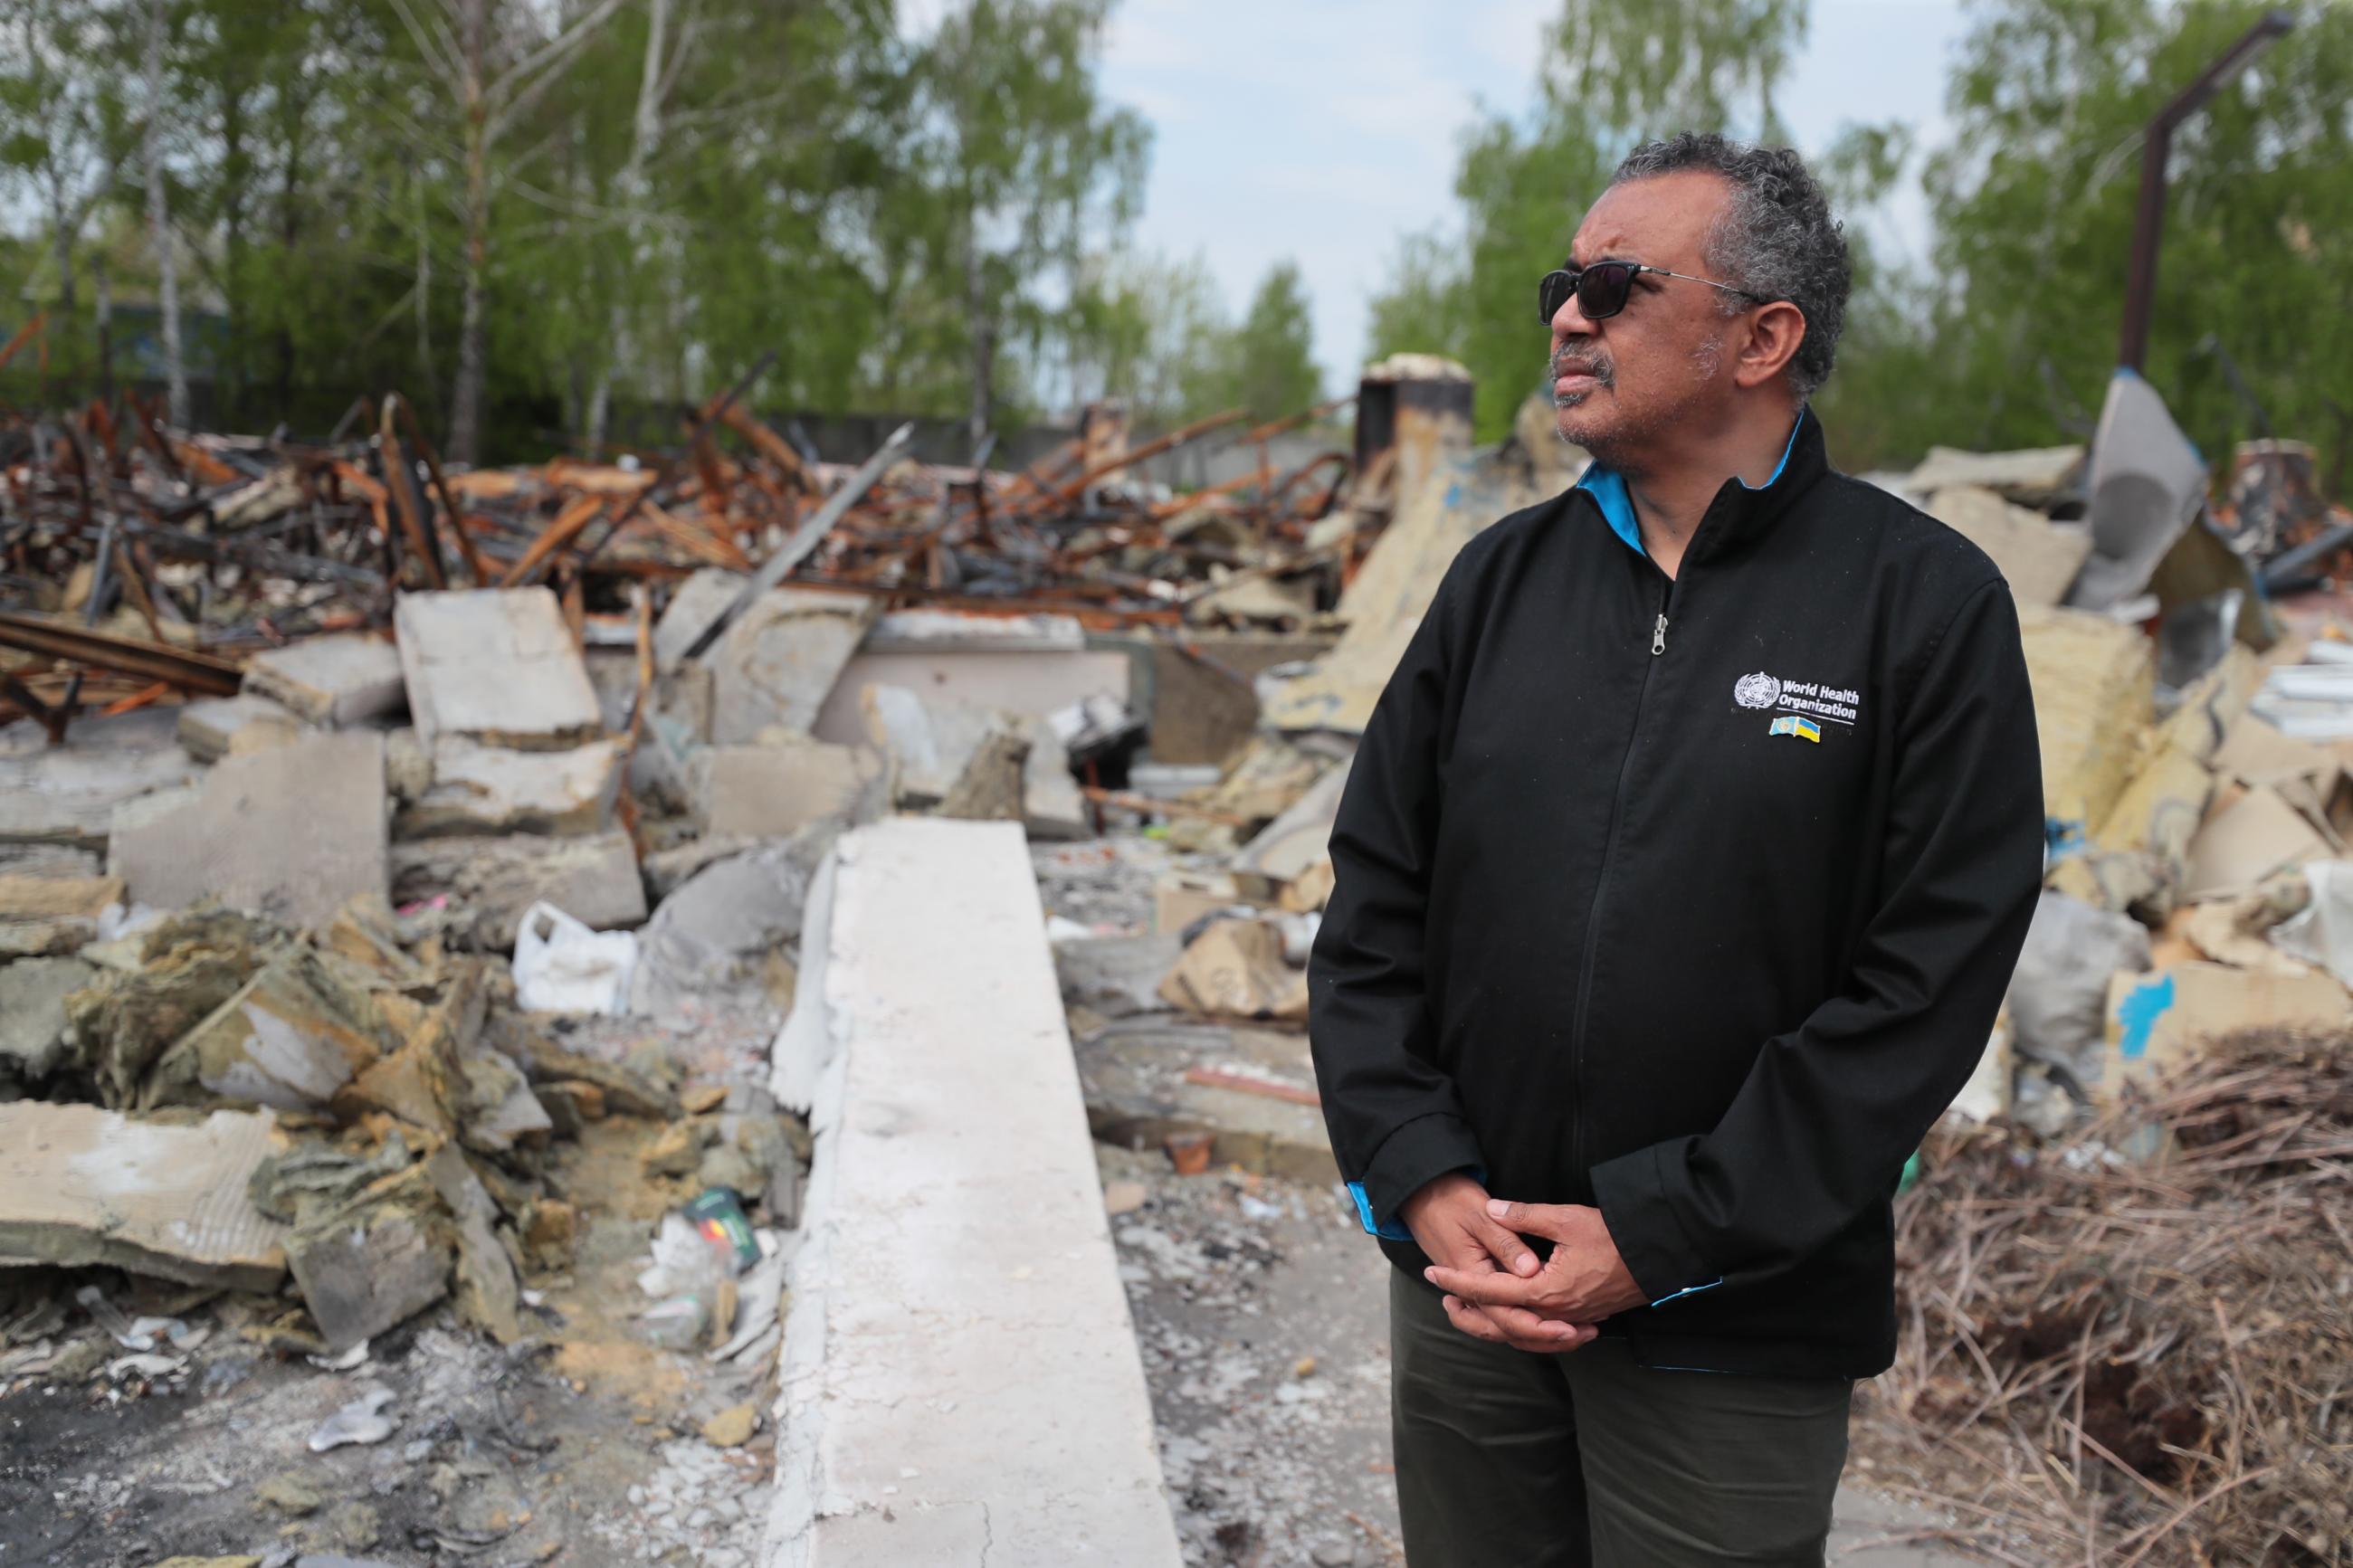 World Health Organization Tedros Adhanom Ghebreyesus stands looking pensive in front of a destroyed Primary Health Care center/COVID-19 Vaccination Site near Makariv District Hospital, Ukraine on 07 May 2022.